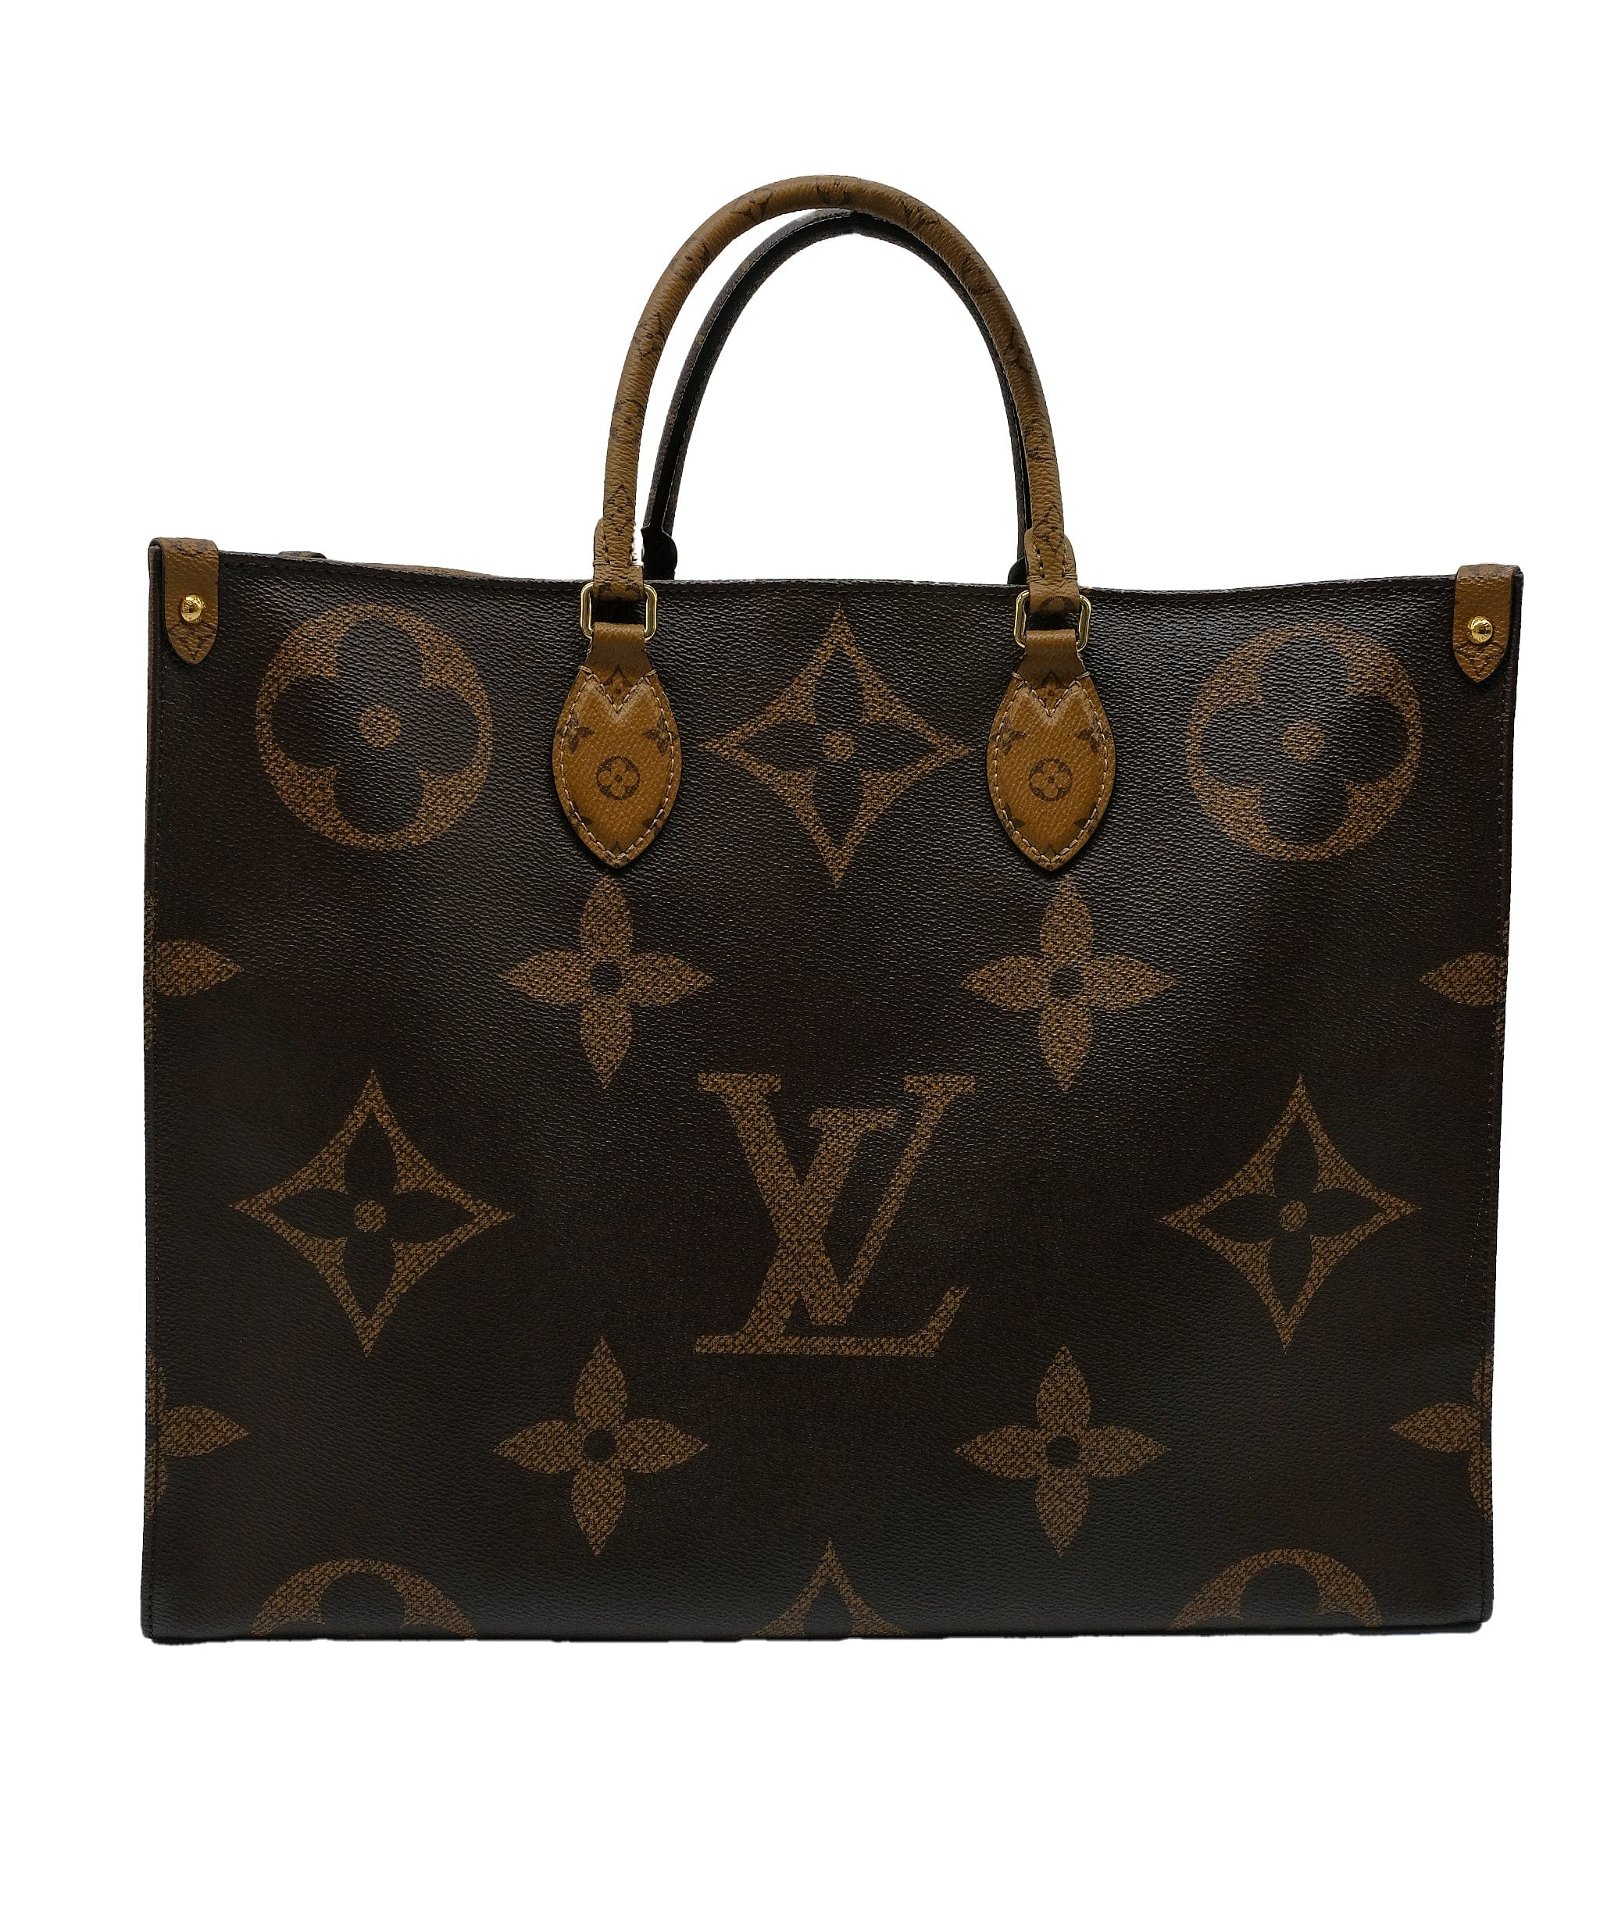 Image of Louis Vuitton On the Go Monogram w/ CoverRJC3144